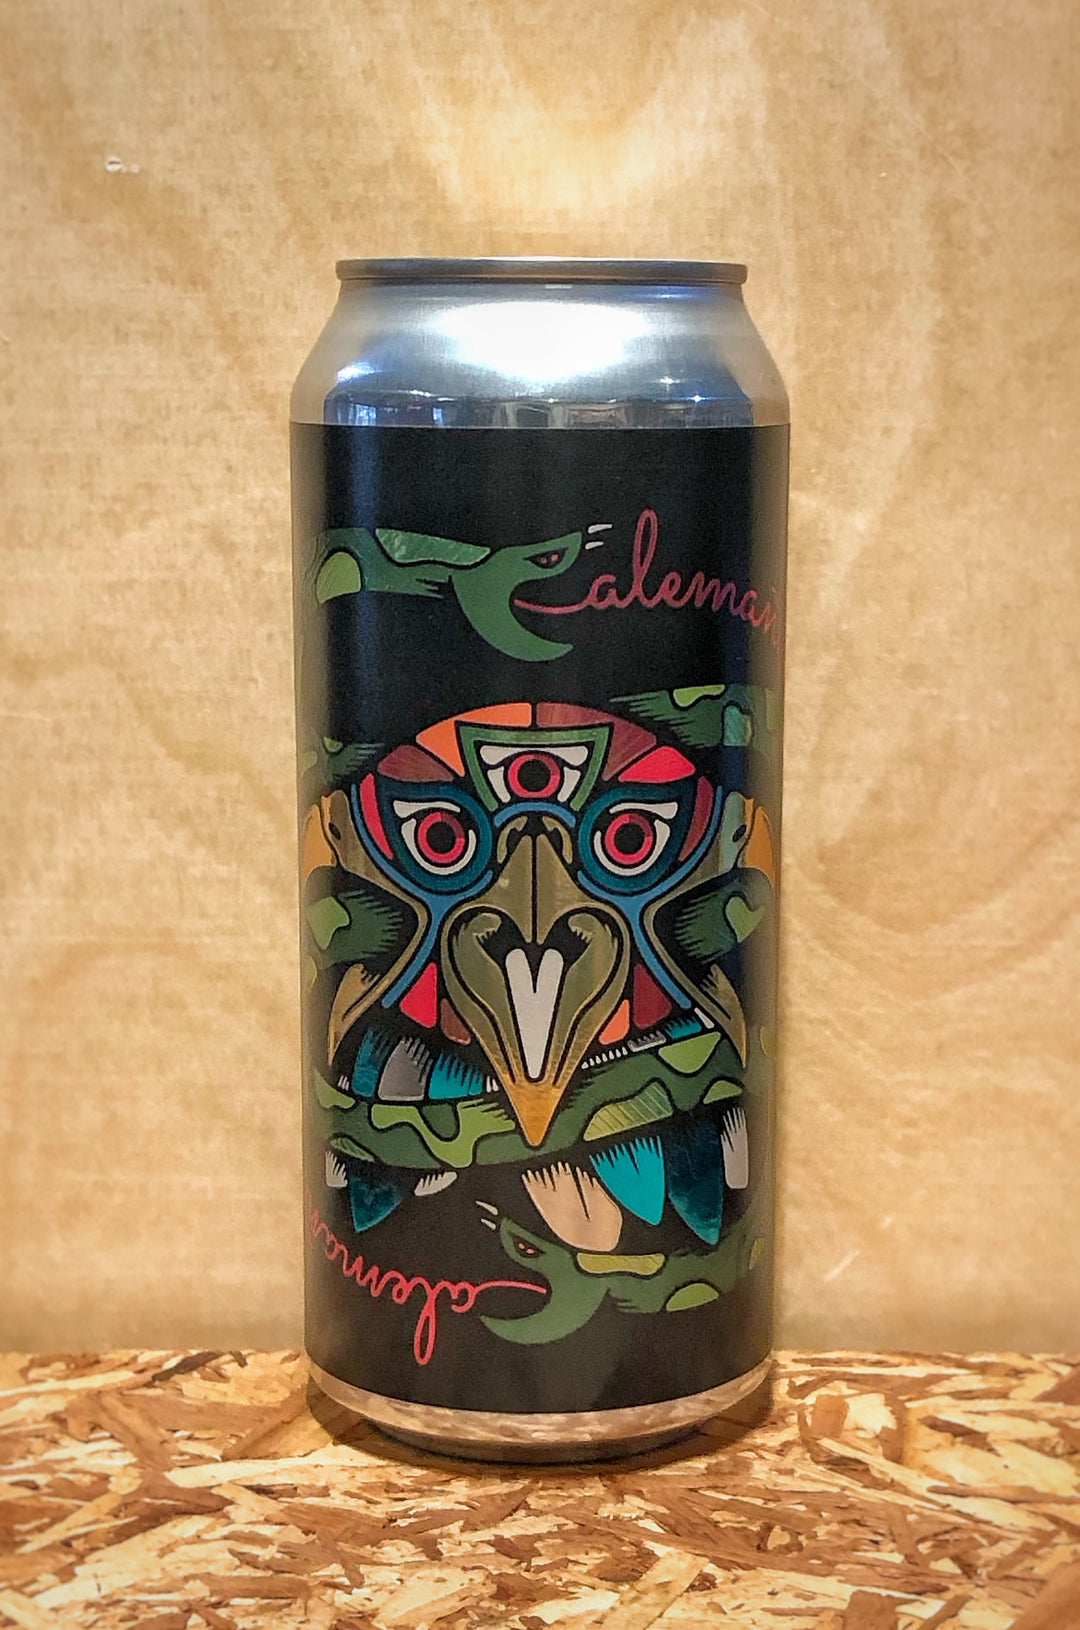 City Built Brewing Company 'Alemania' Mexican-Style Lager (Grand Rapids, MI)